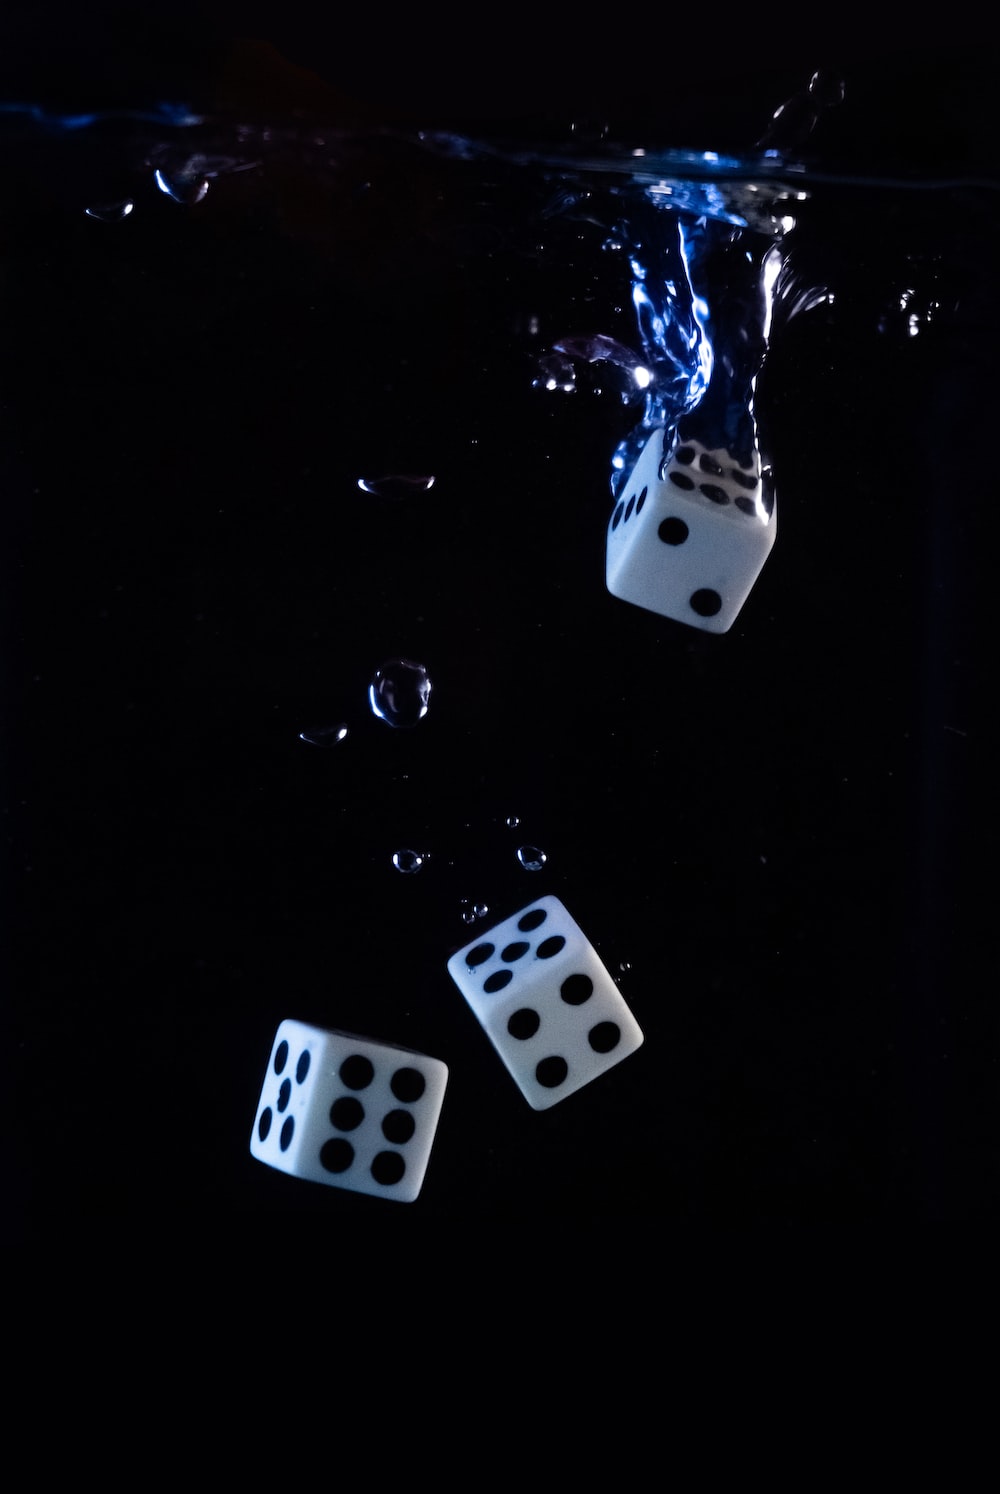 three dices floating in the water on a black background photo